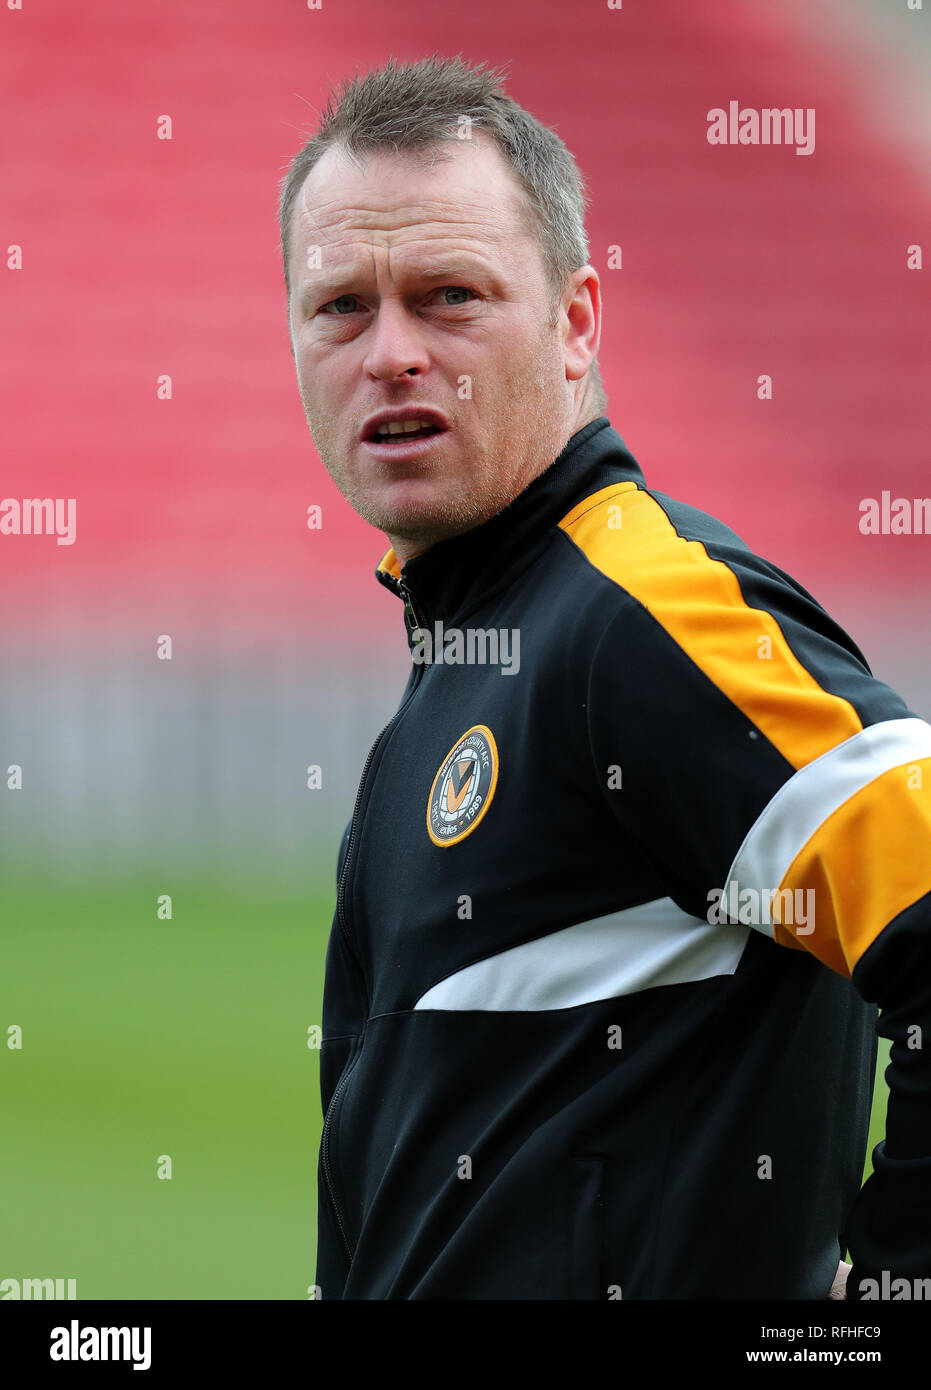 MICHAEL FLYNN, Newport County FC MANAGER, MIDDLESBROUGH FC V NEWPORT COUNTY FC, EMIRATES FA Cup 4TH ROUND, 2019 Foto Stock